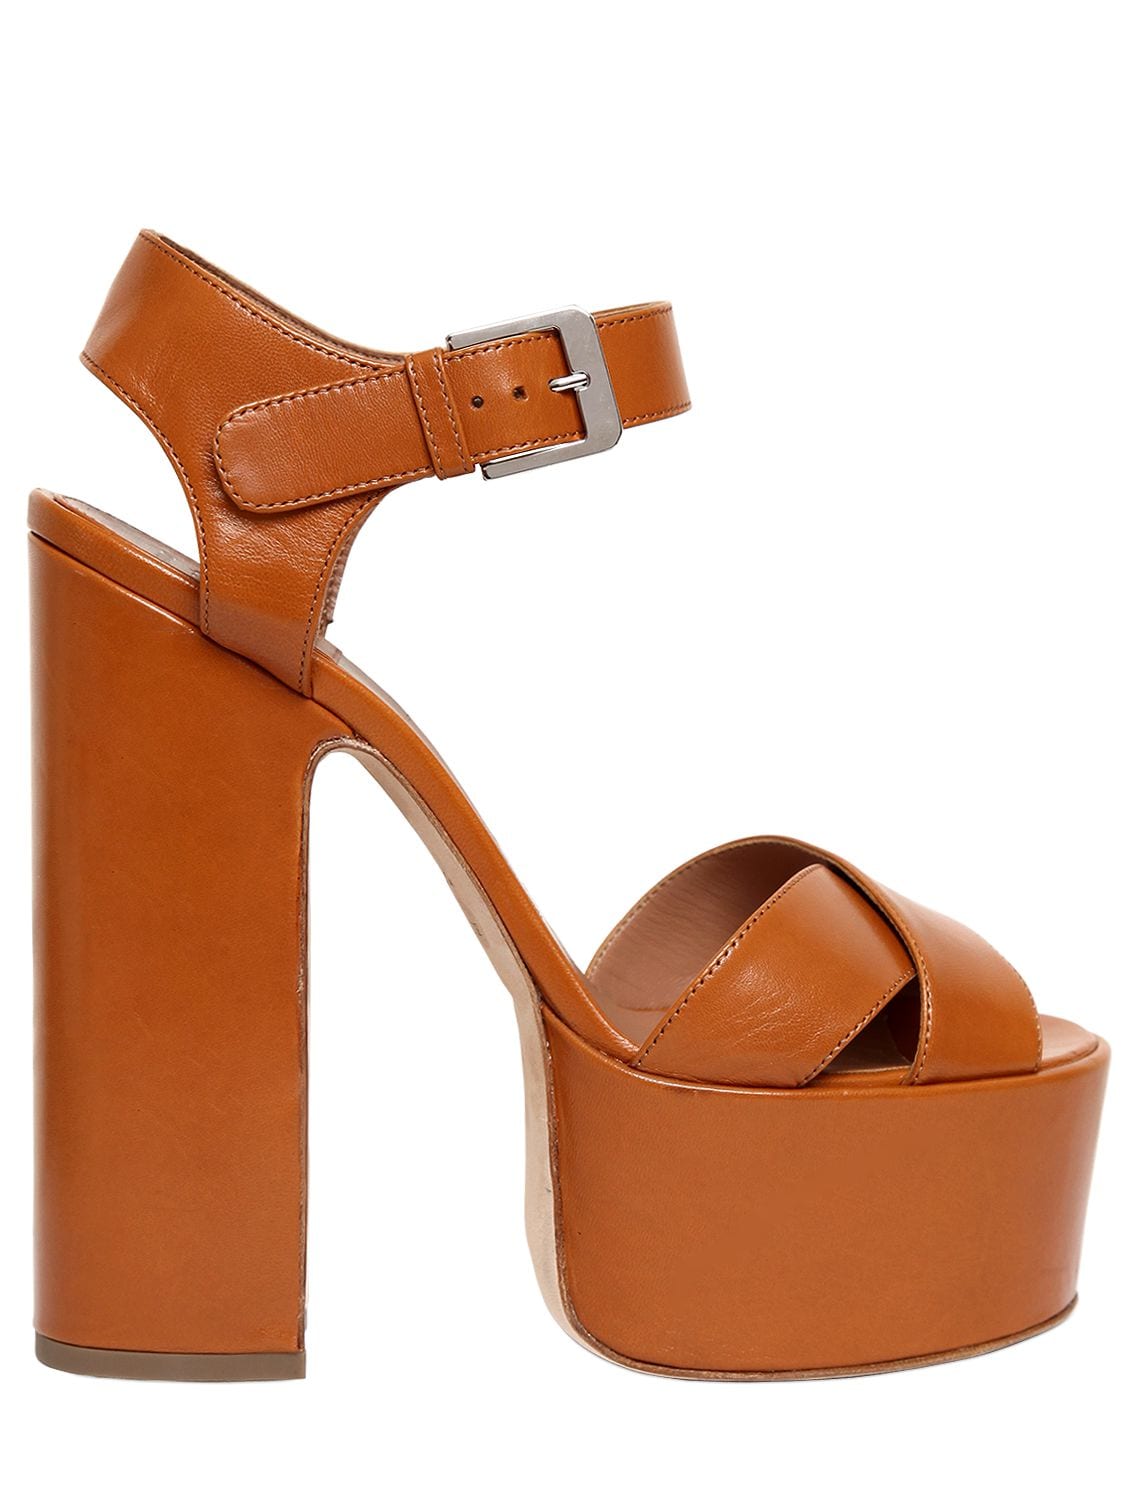 Laurence Dacade 150mm Rosella Leather Platform Sandals In Tan | ModeSens